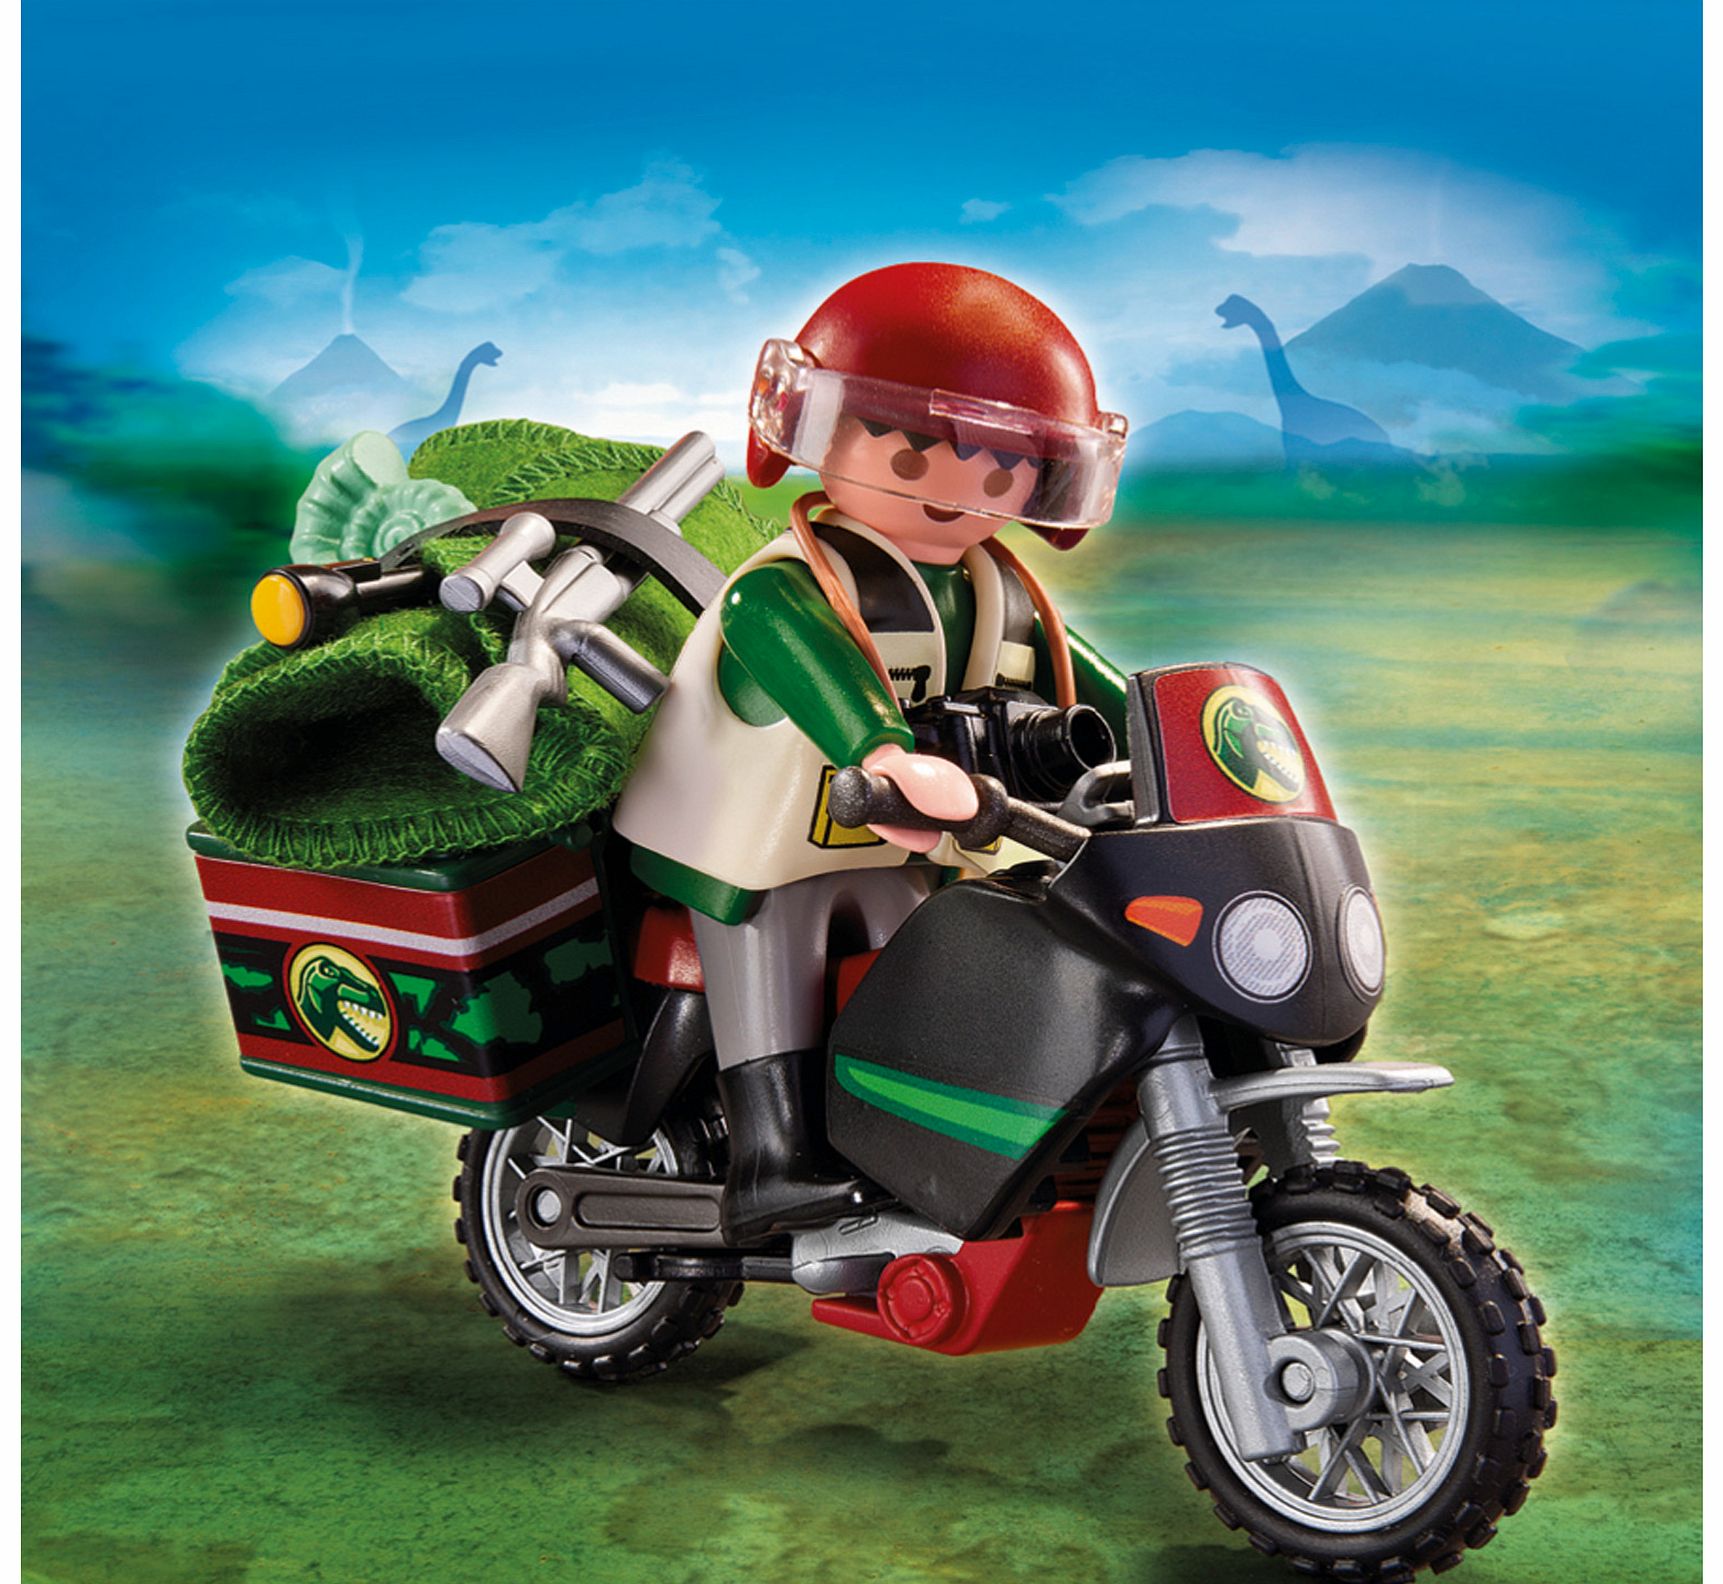 PLAYMOBIL Explorer With Motorcycle 5237